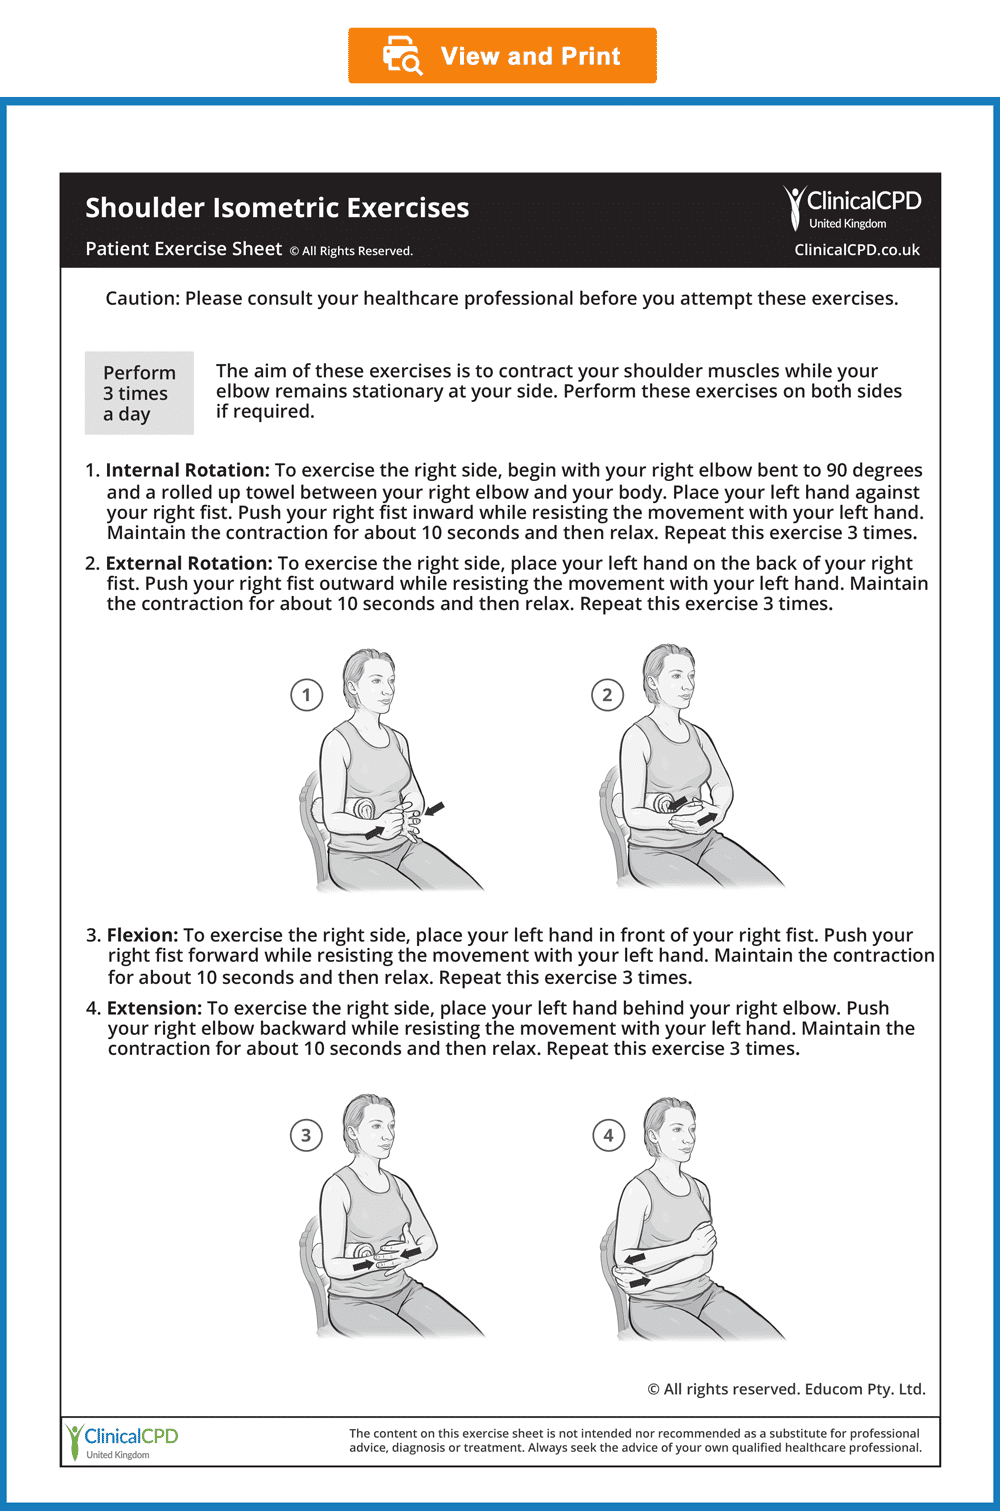 Shoulder-Isometric-Exercises-CPD